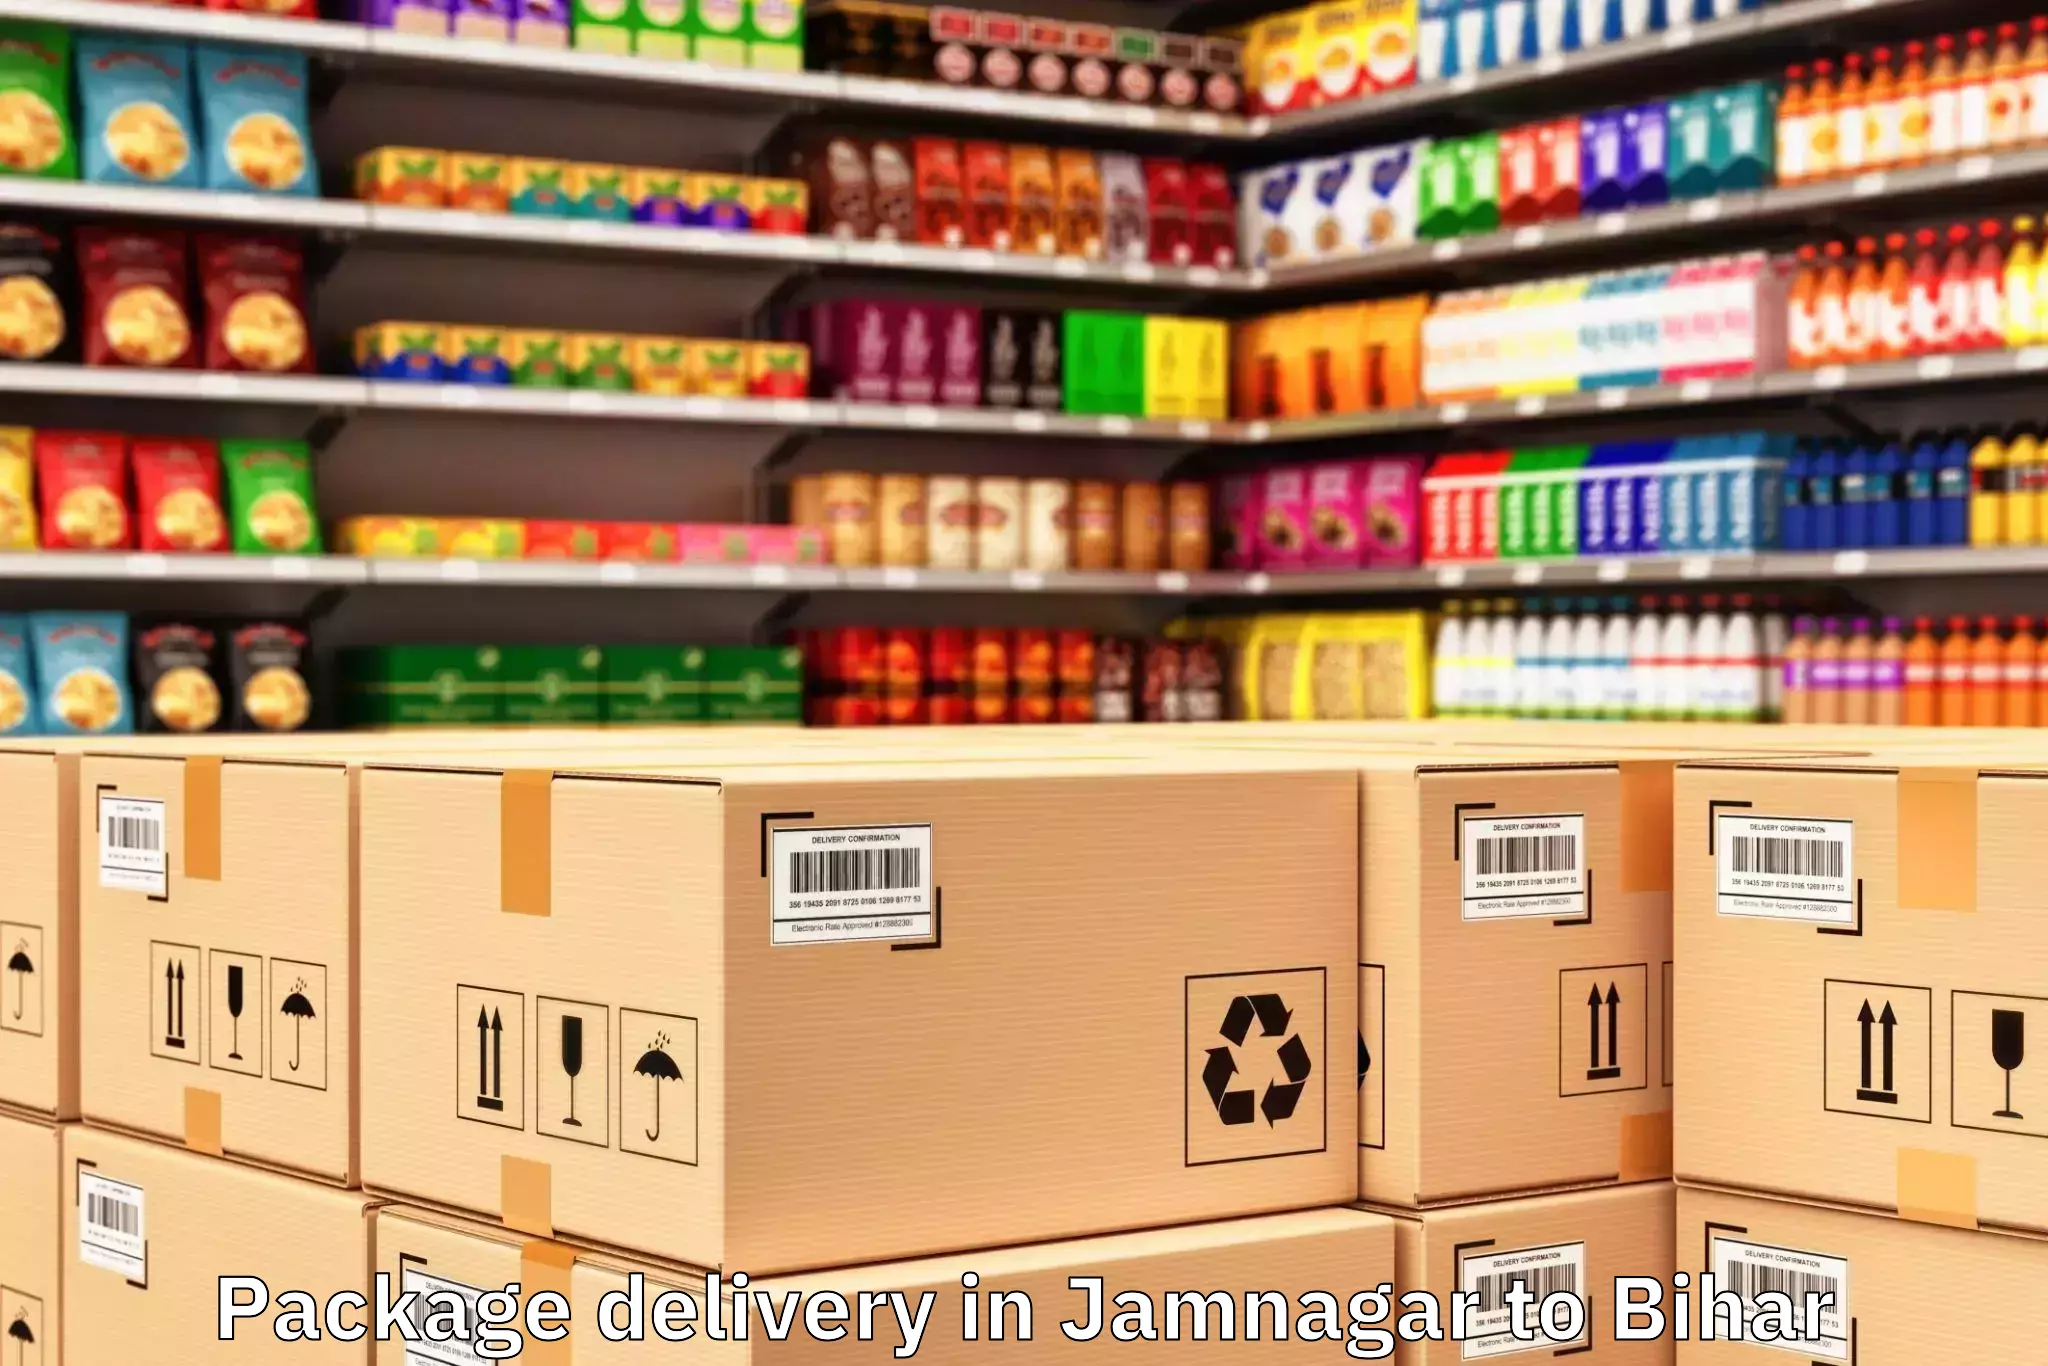 Easy Jamnagar to Rupauli Package Delivery Booking